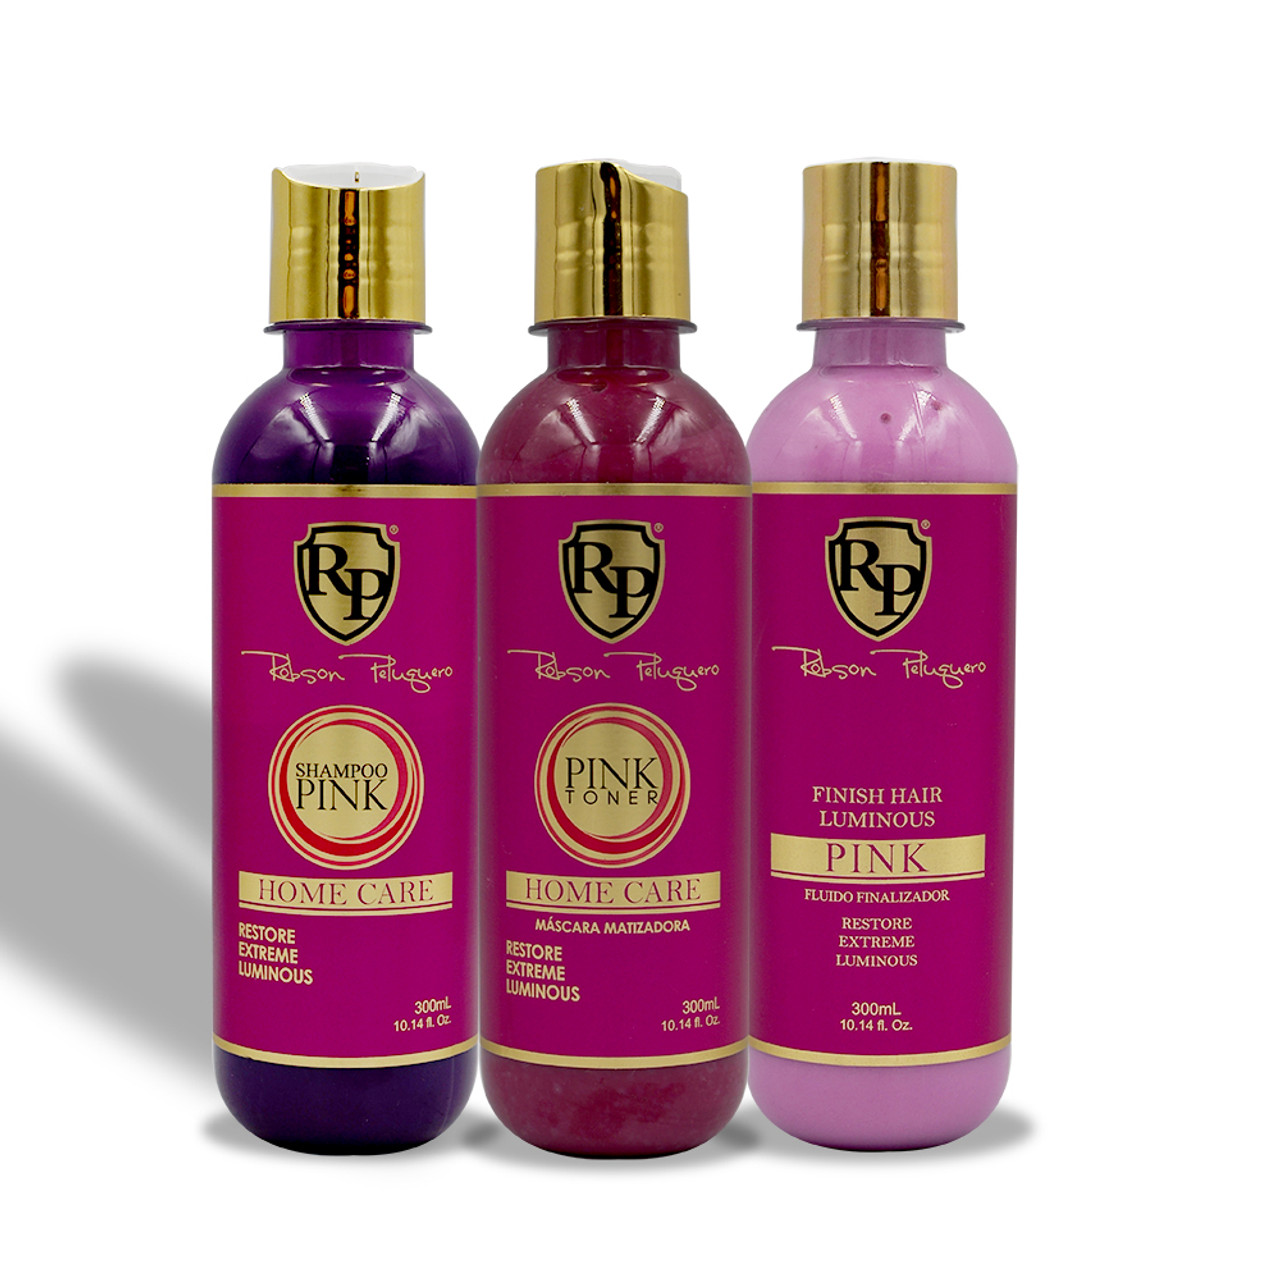 Robson Peluquero Pink Home Care Matizer + Thermal Finisher